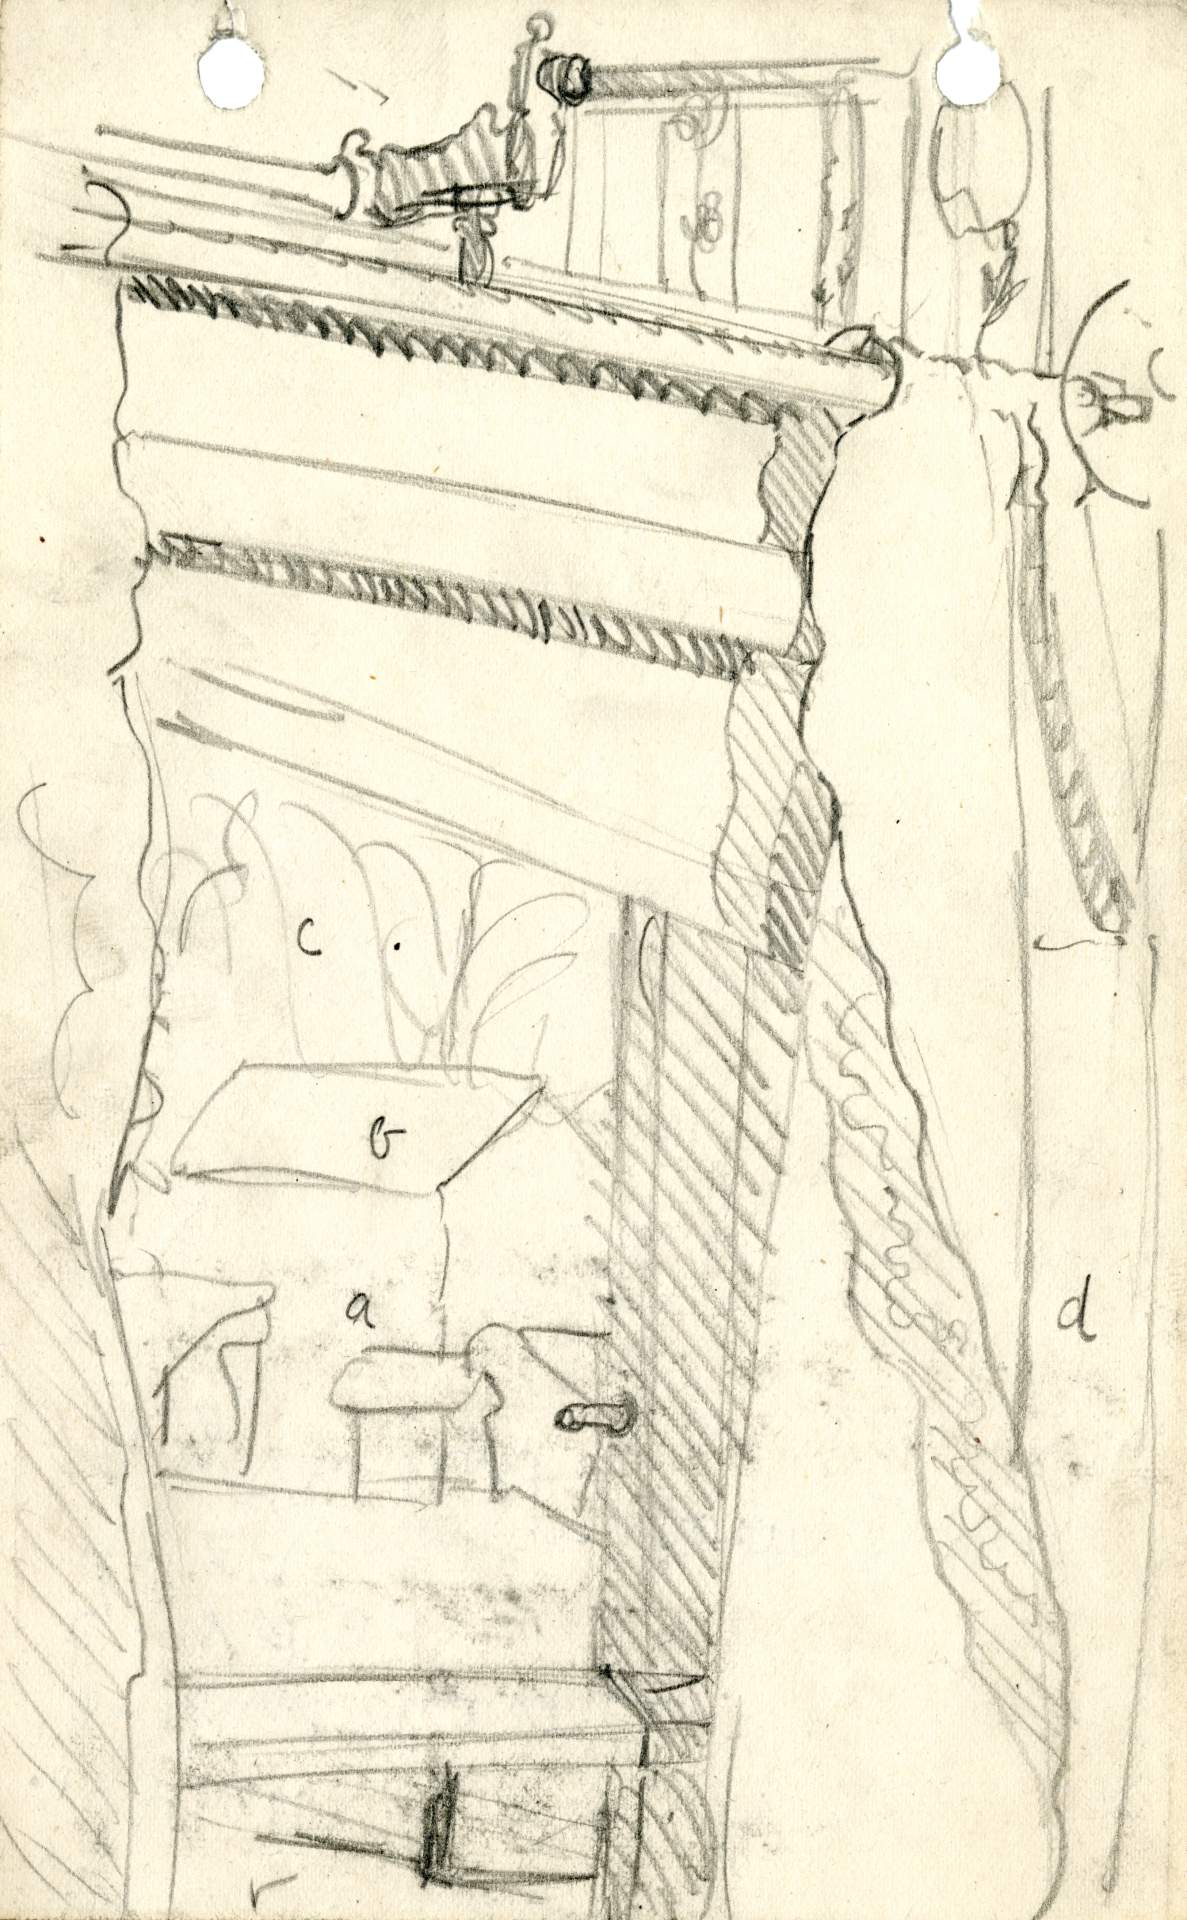 Sketch from an upstairs window in Burchfield’s Salem home